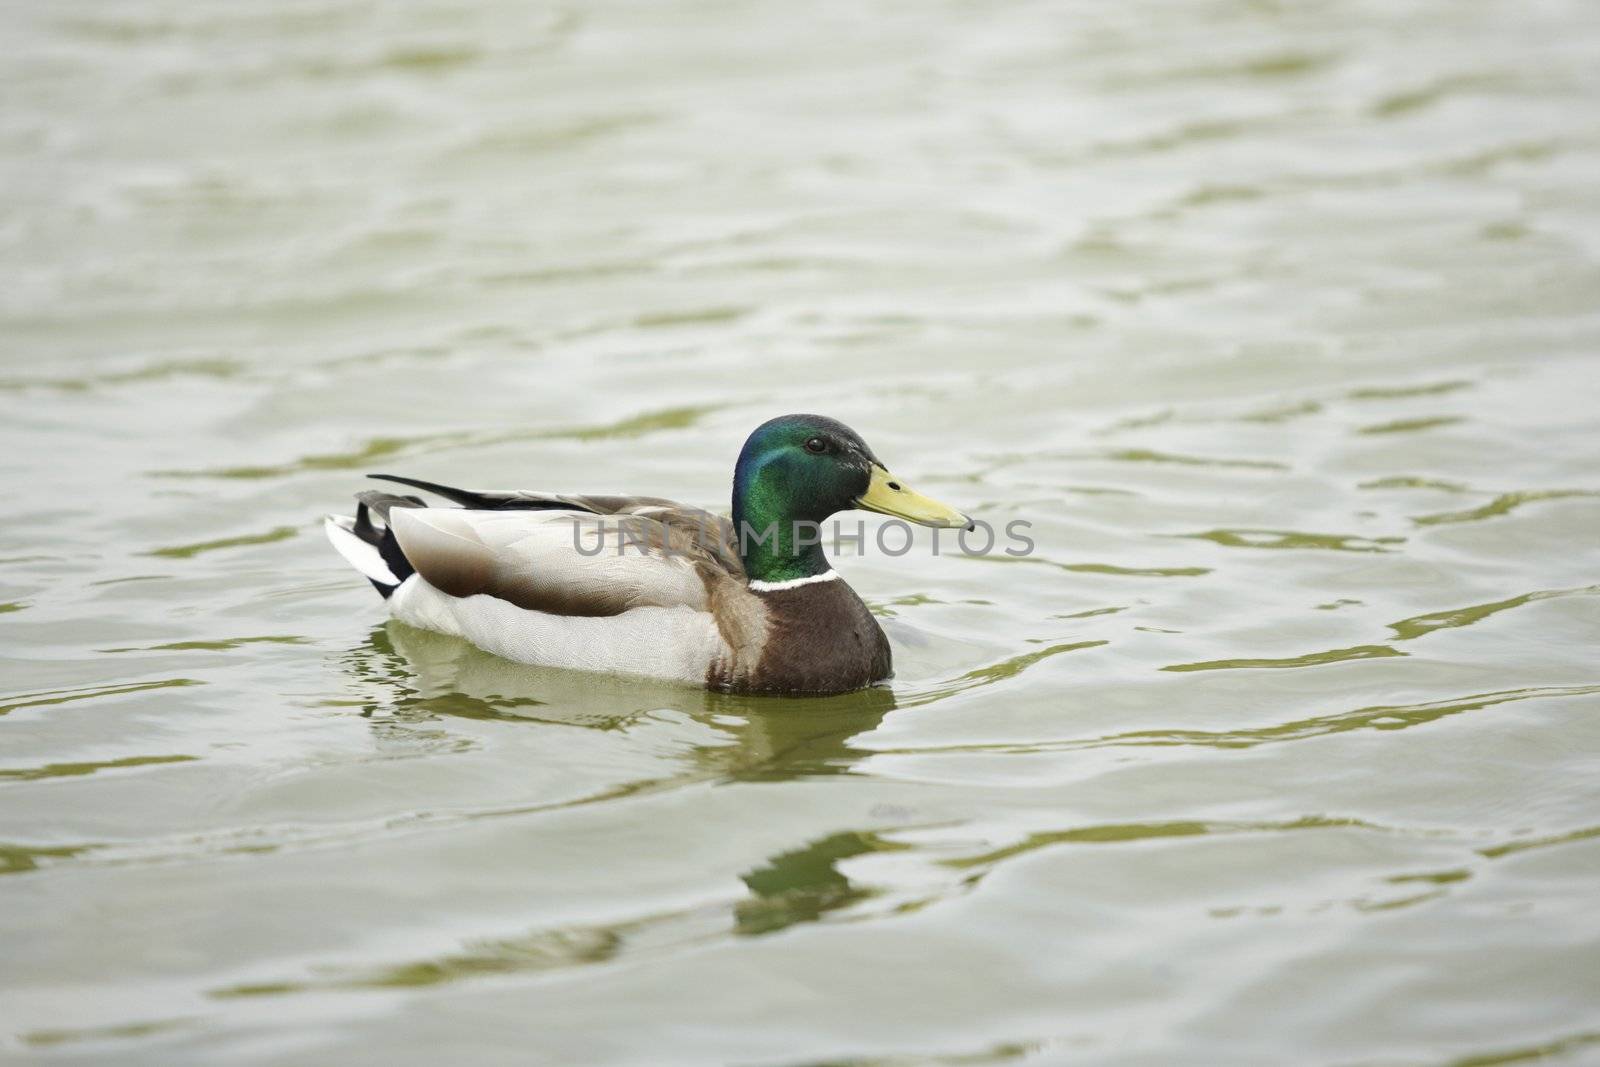 A duck in a pond